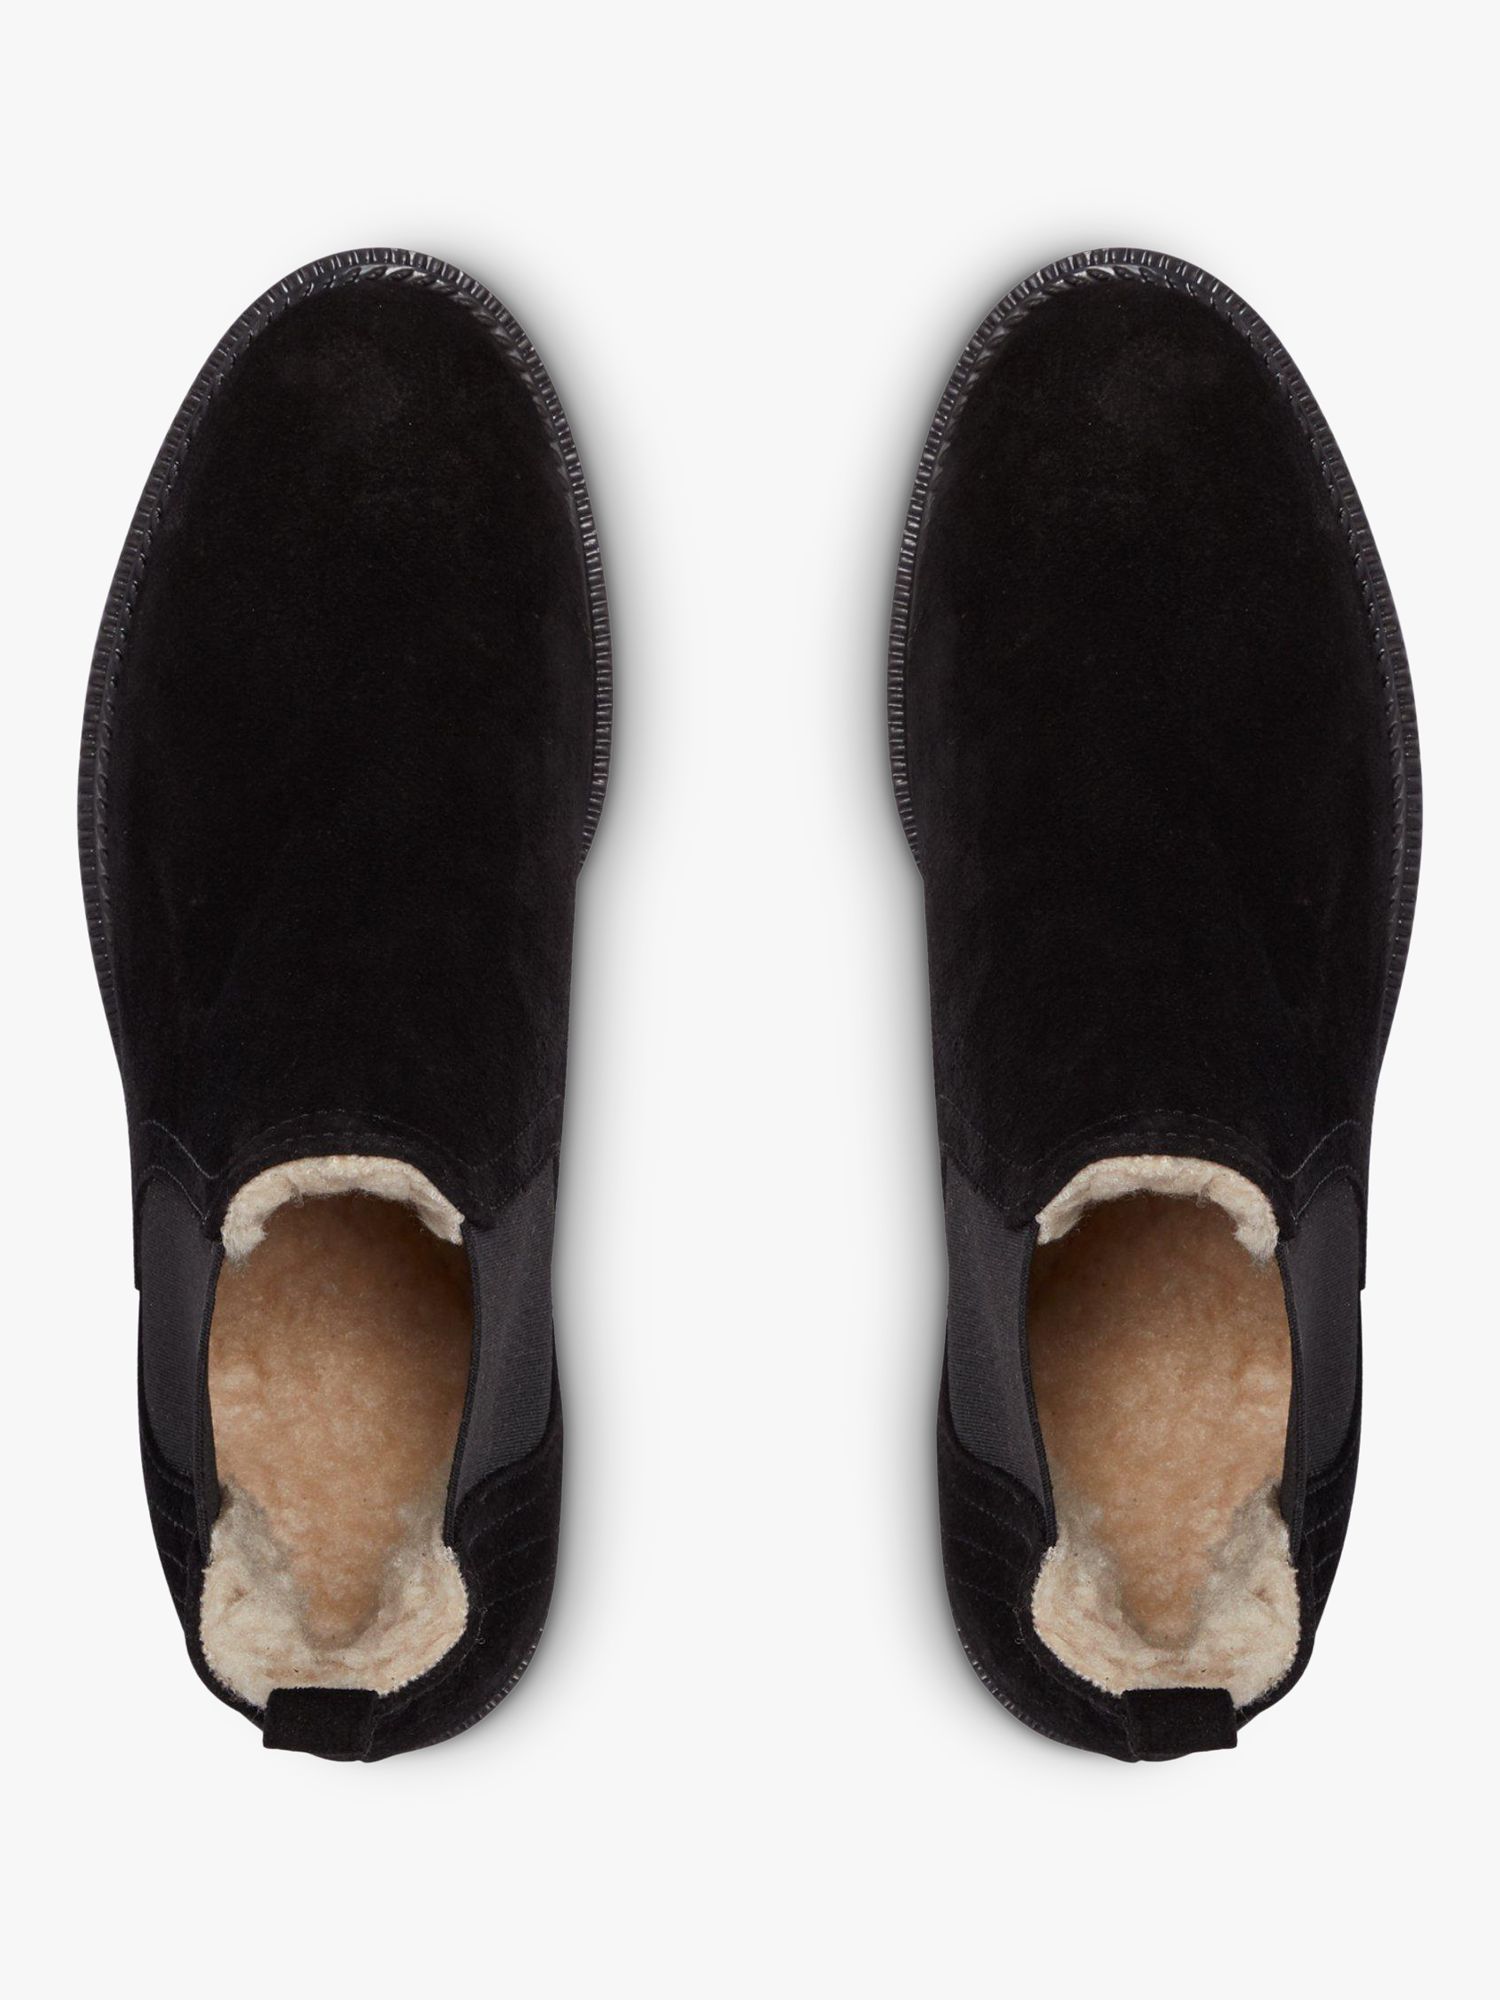 Dune Pedal Suede Faux Shearling Chelsea Boots, Black at Lewis & Partners